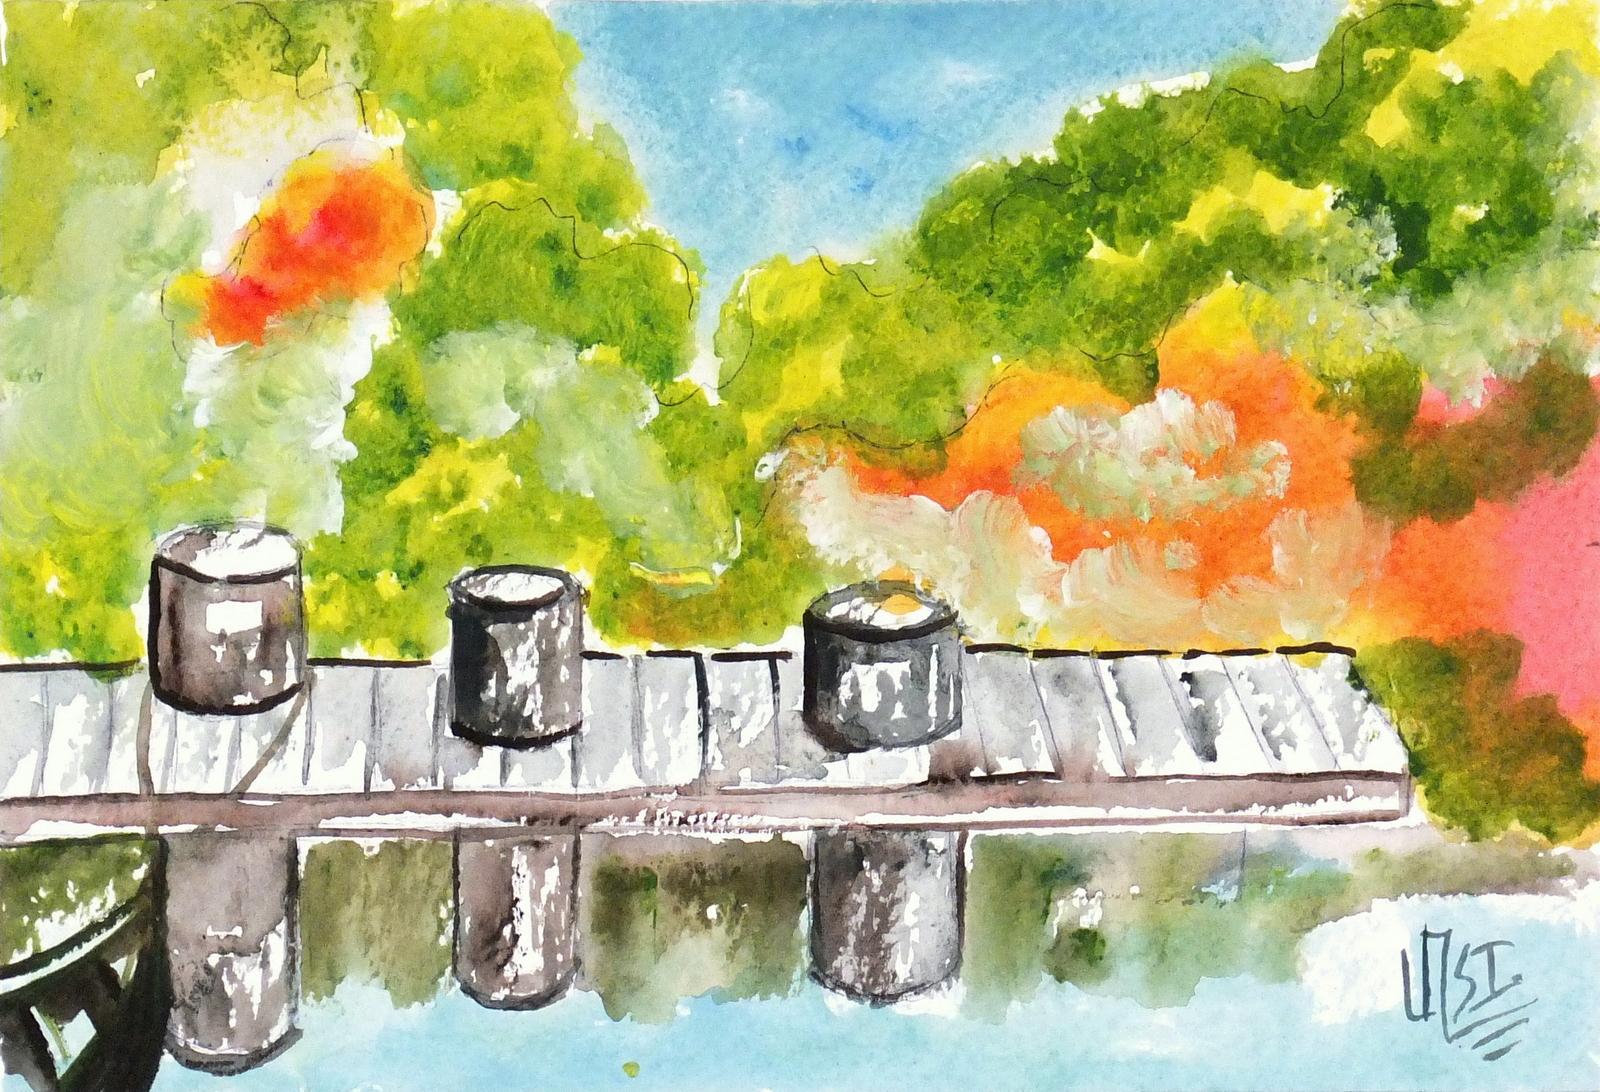 Vibrant Mexican Watercolor Painting - The Boat Dock